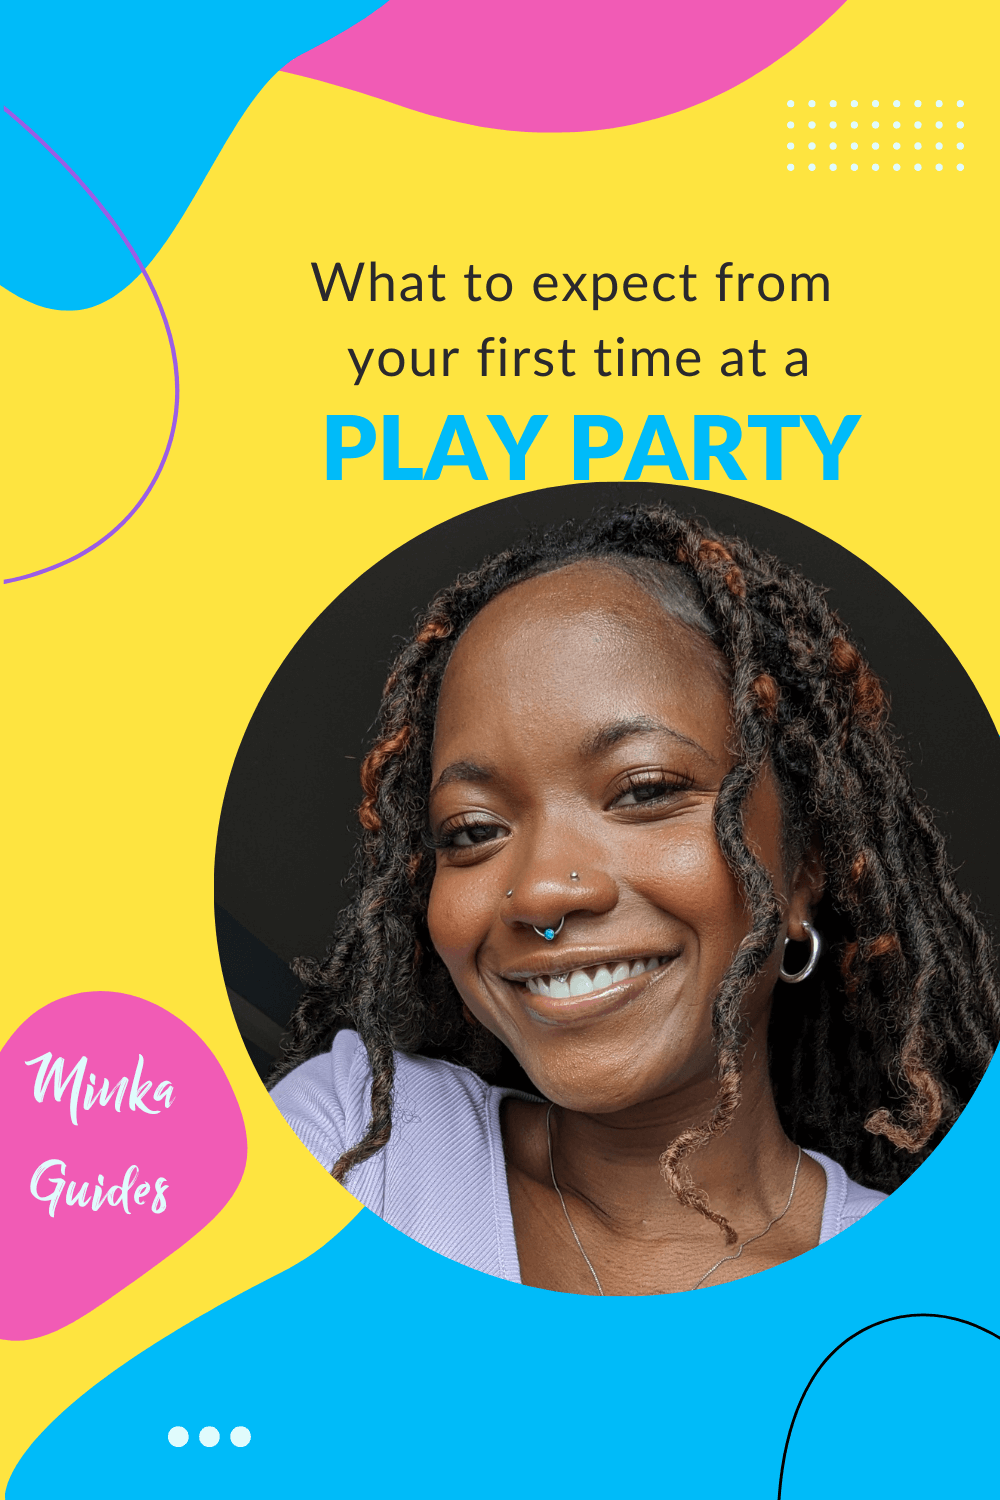 First time at a play party | Minka Guides